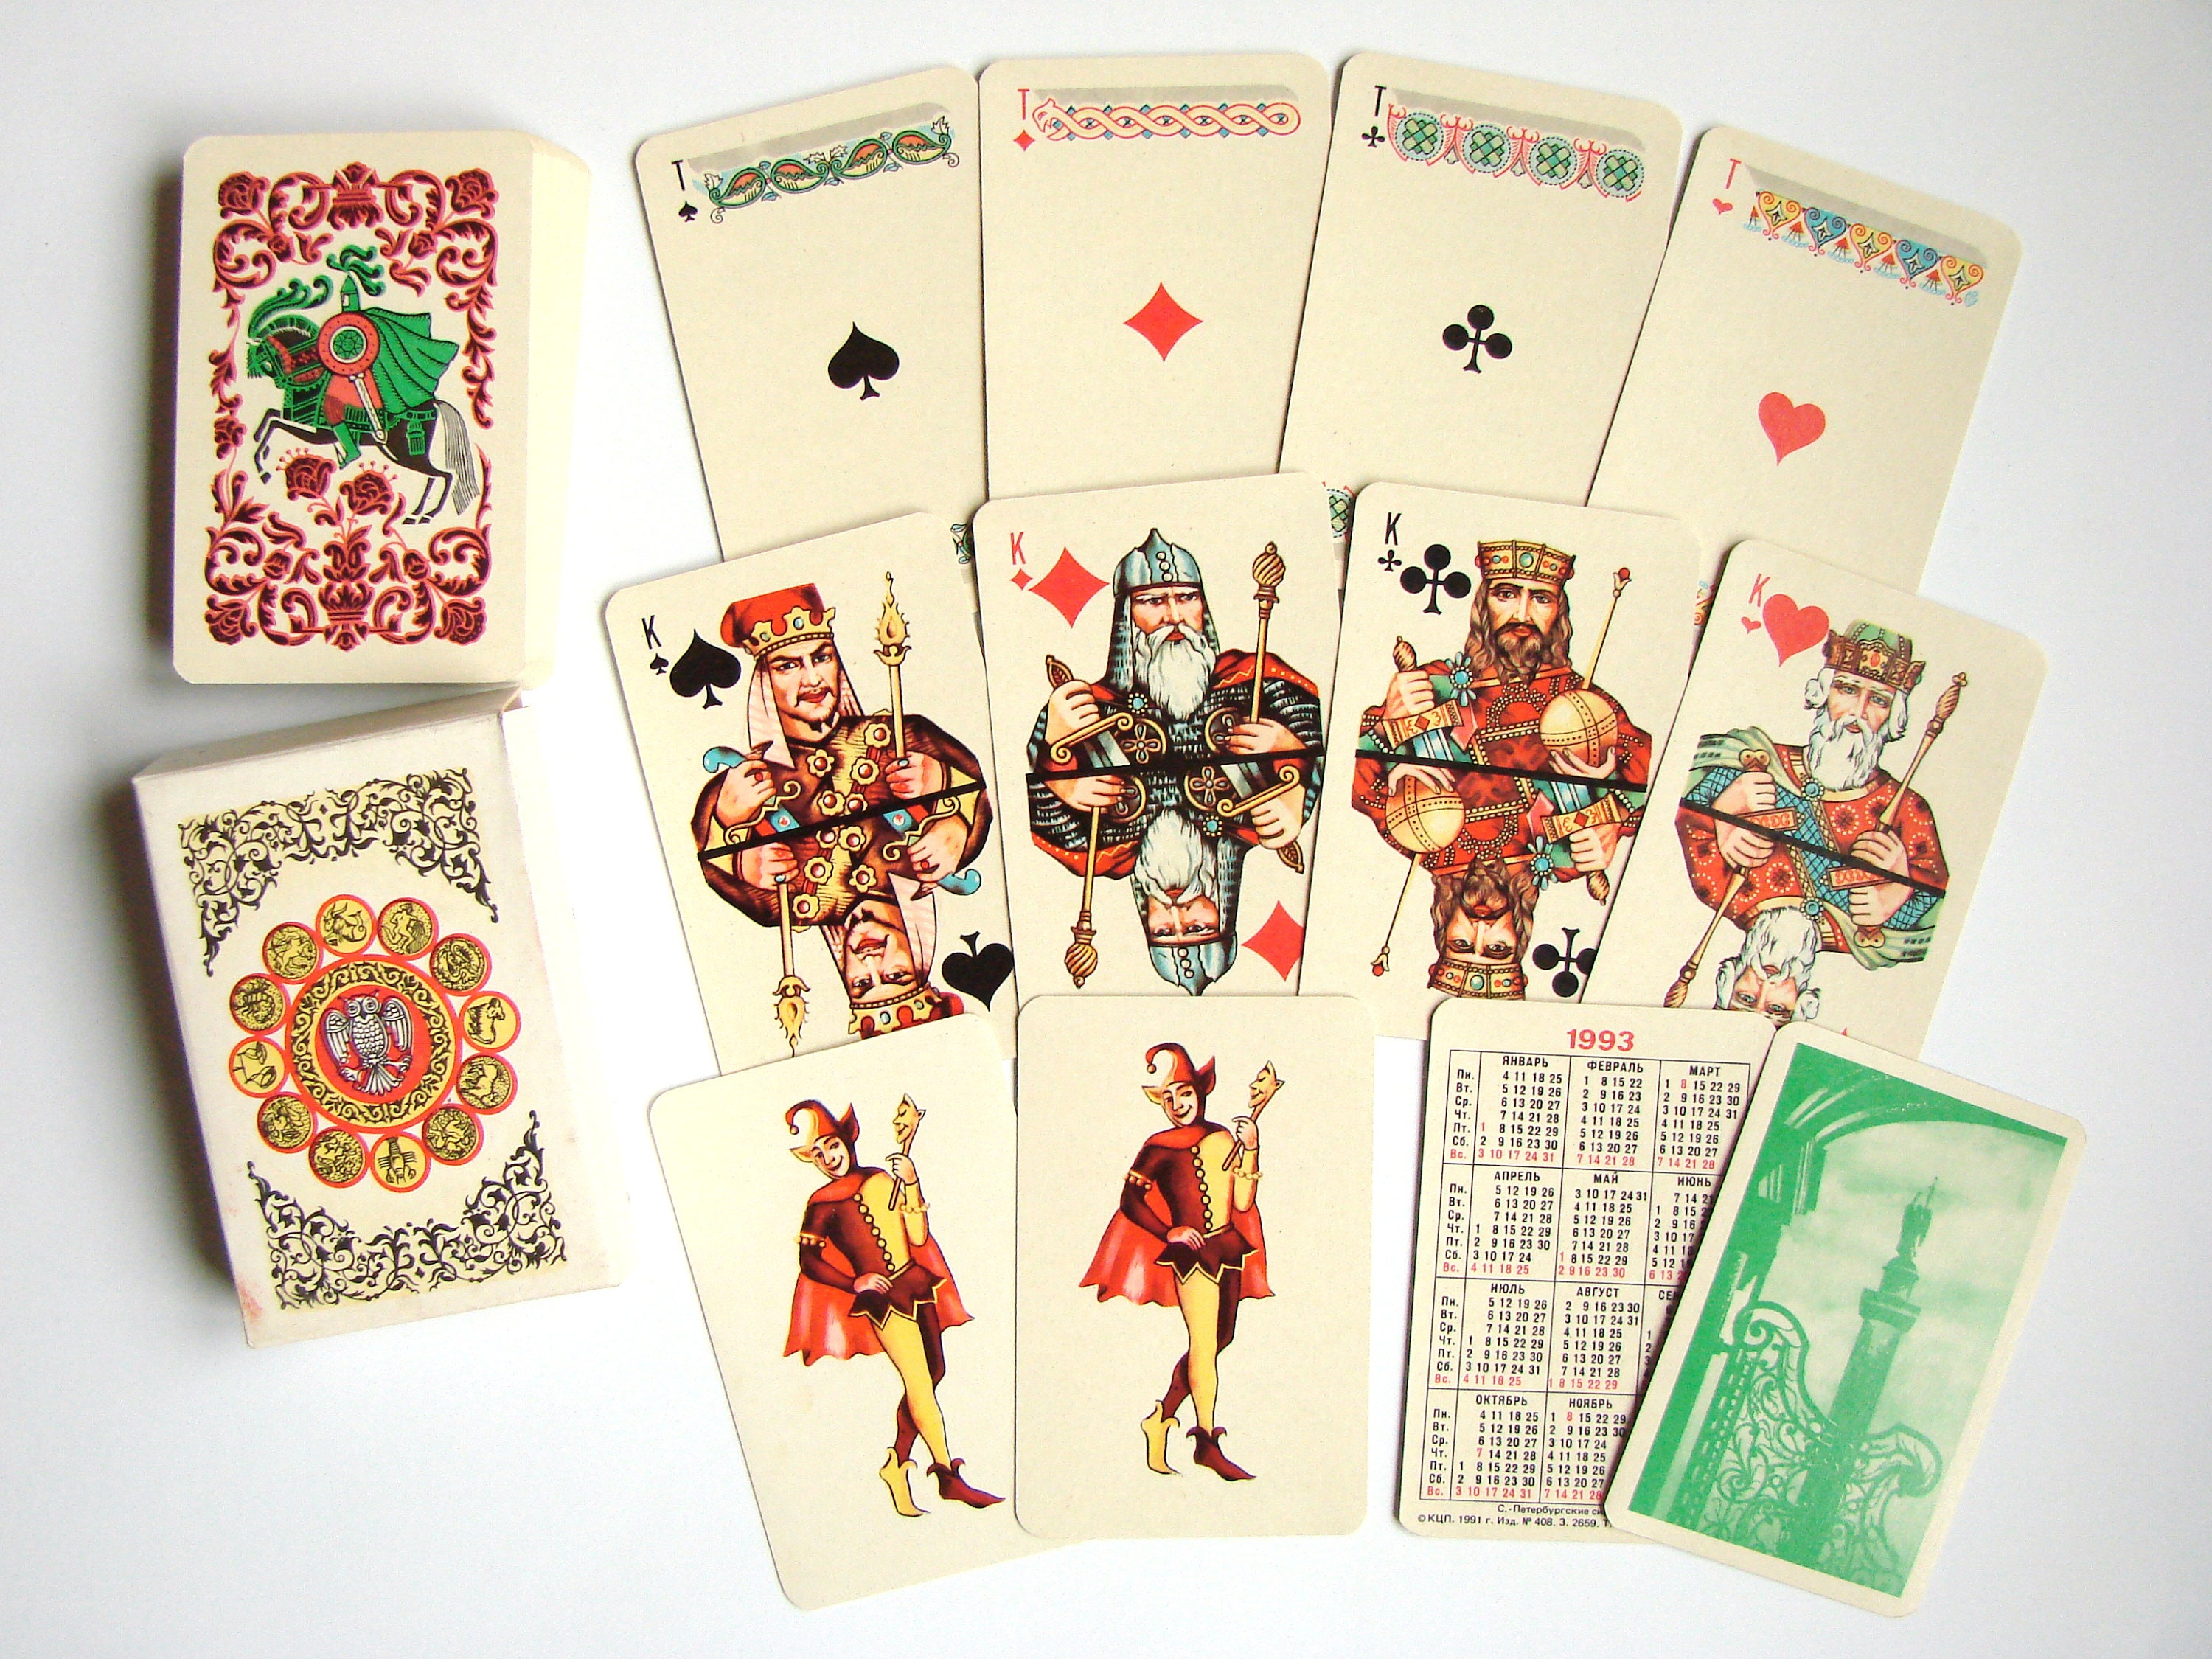 Las Vegas Round Deck Playing Cards 1960's Souvenir Excellent Condition –  Power Of One Designs